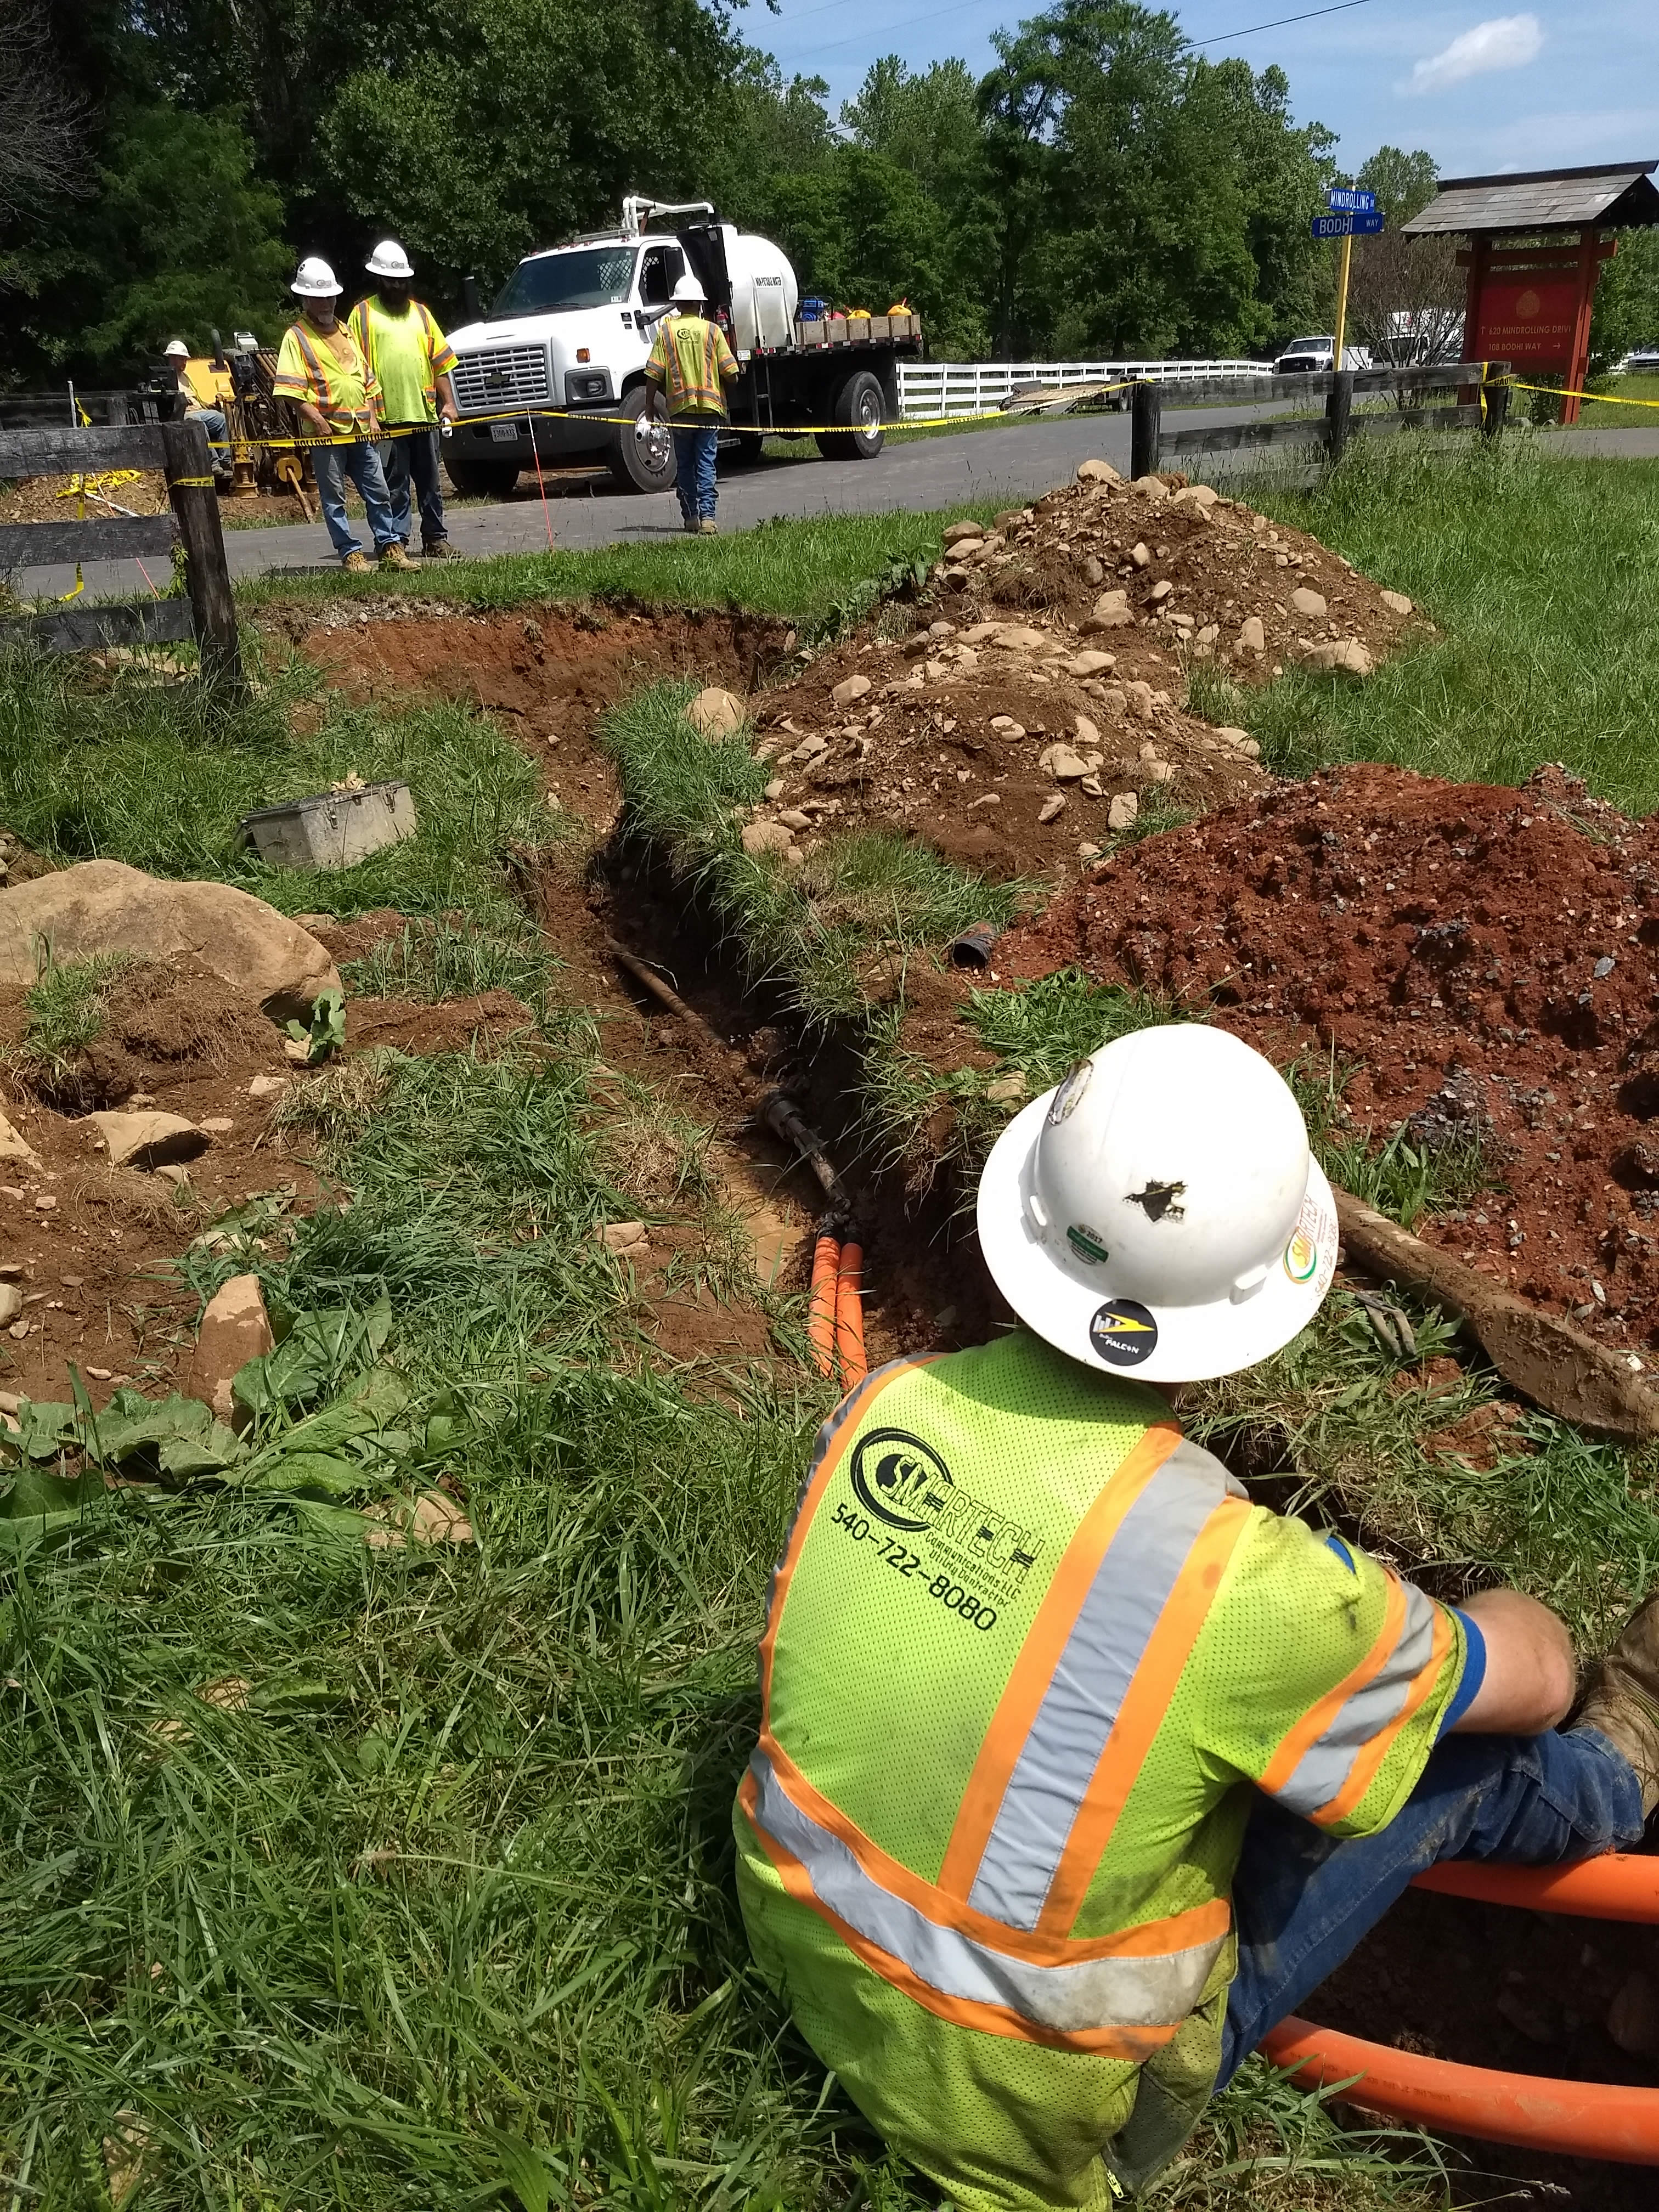 Horizontal drill emerges at opposite side of Mindrolling Drive